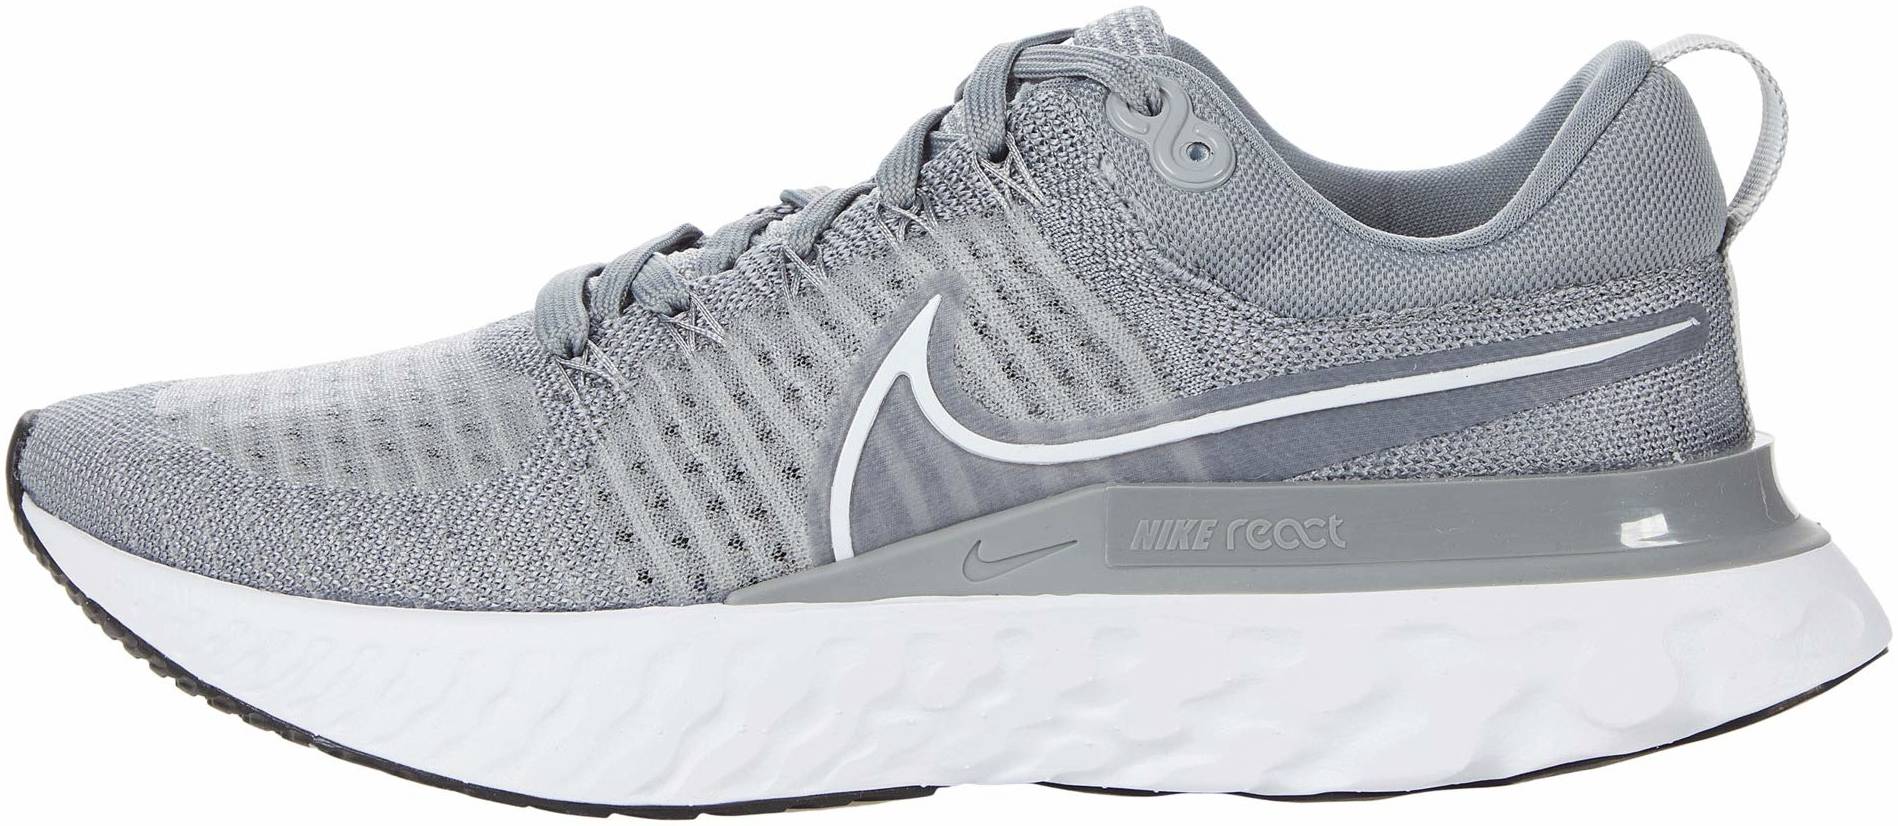 80+ Grey Nike running shoes: Save up to 